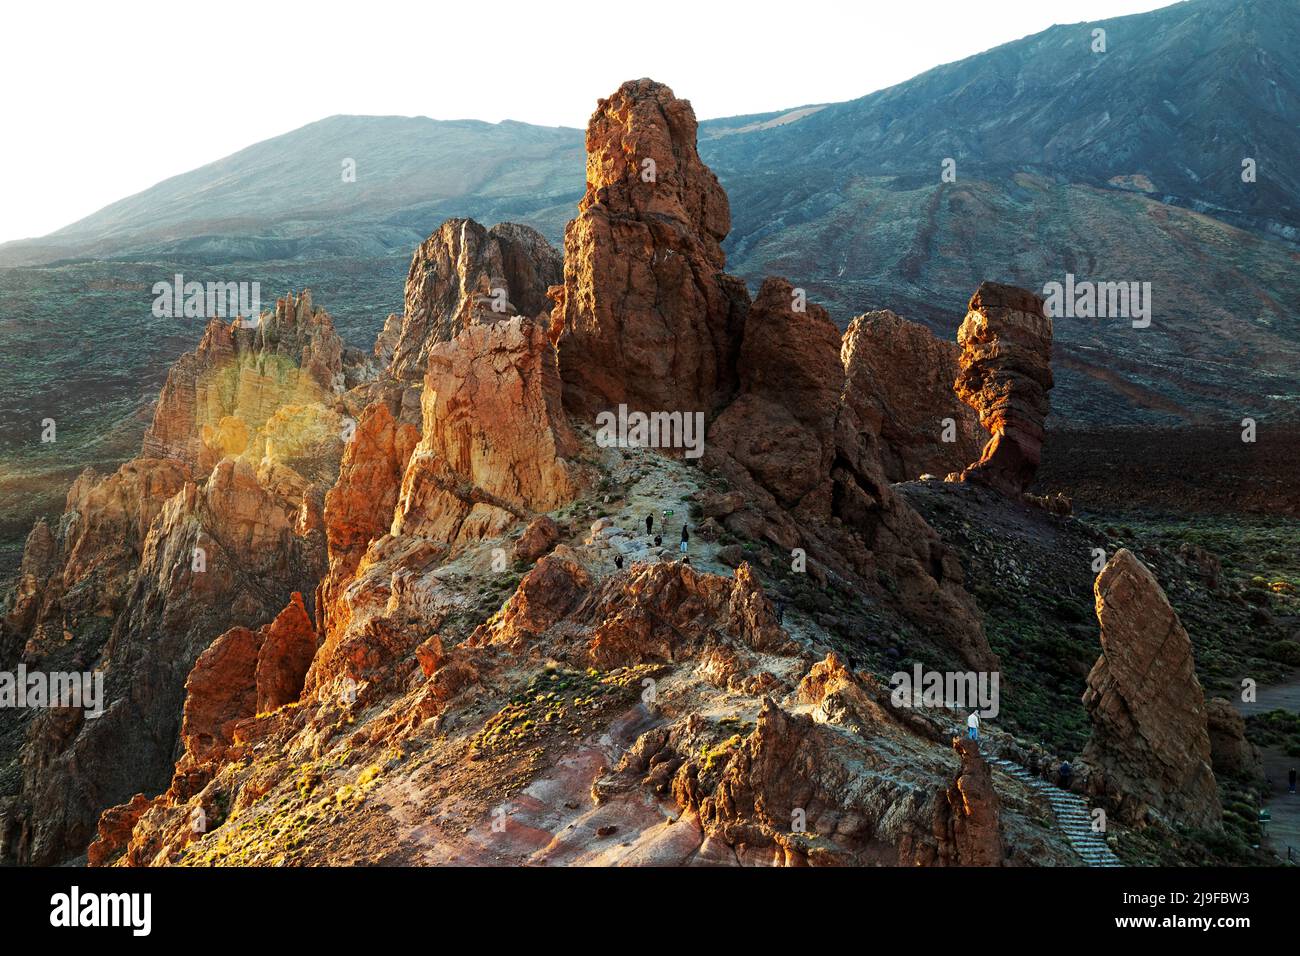 People climb the Roques de García rock formation in Teide National Park in Tenerife, Spain. Stock Photo